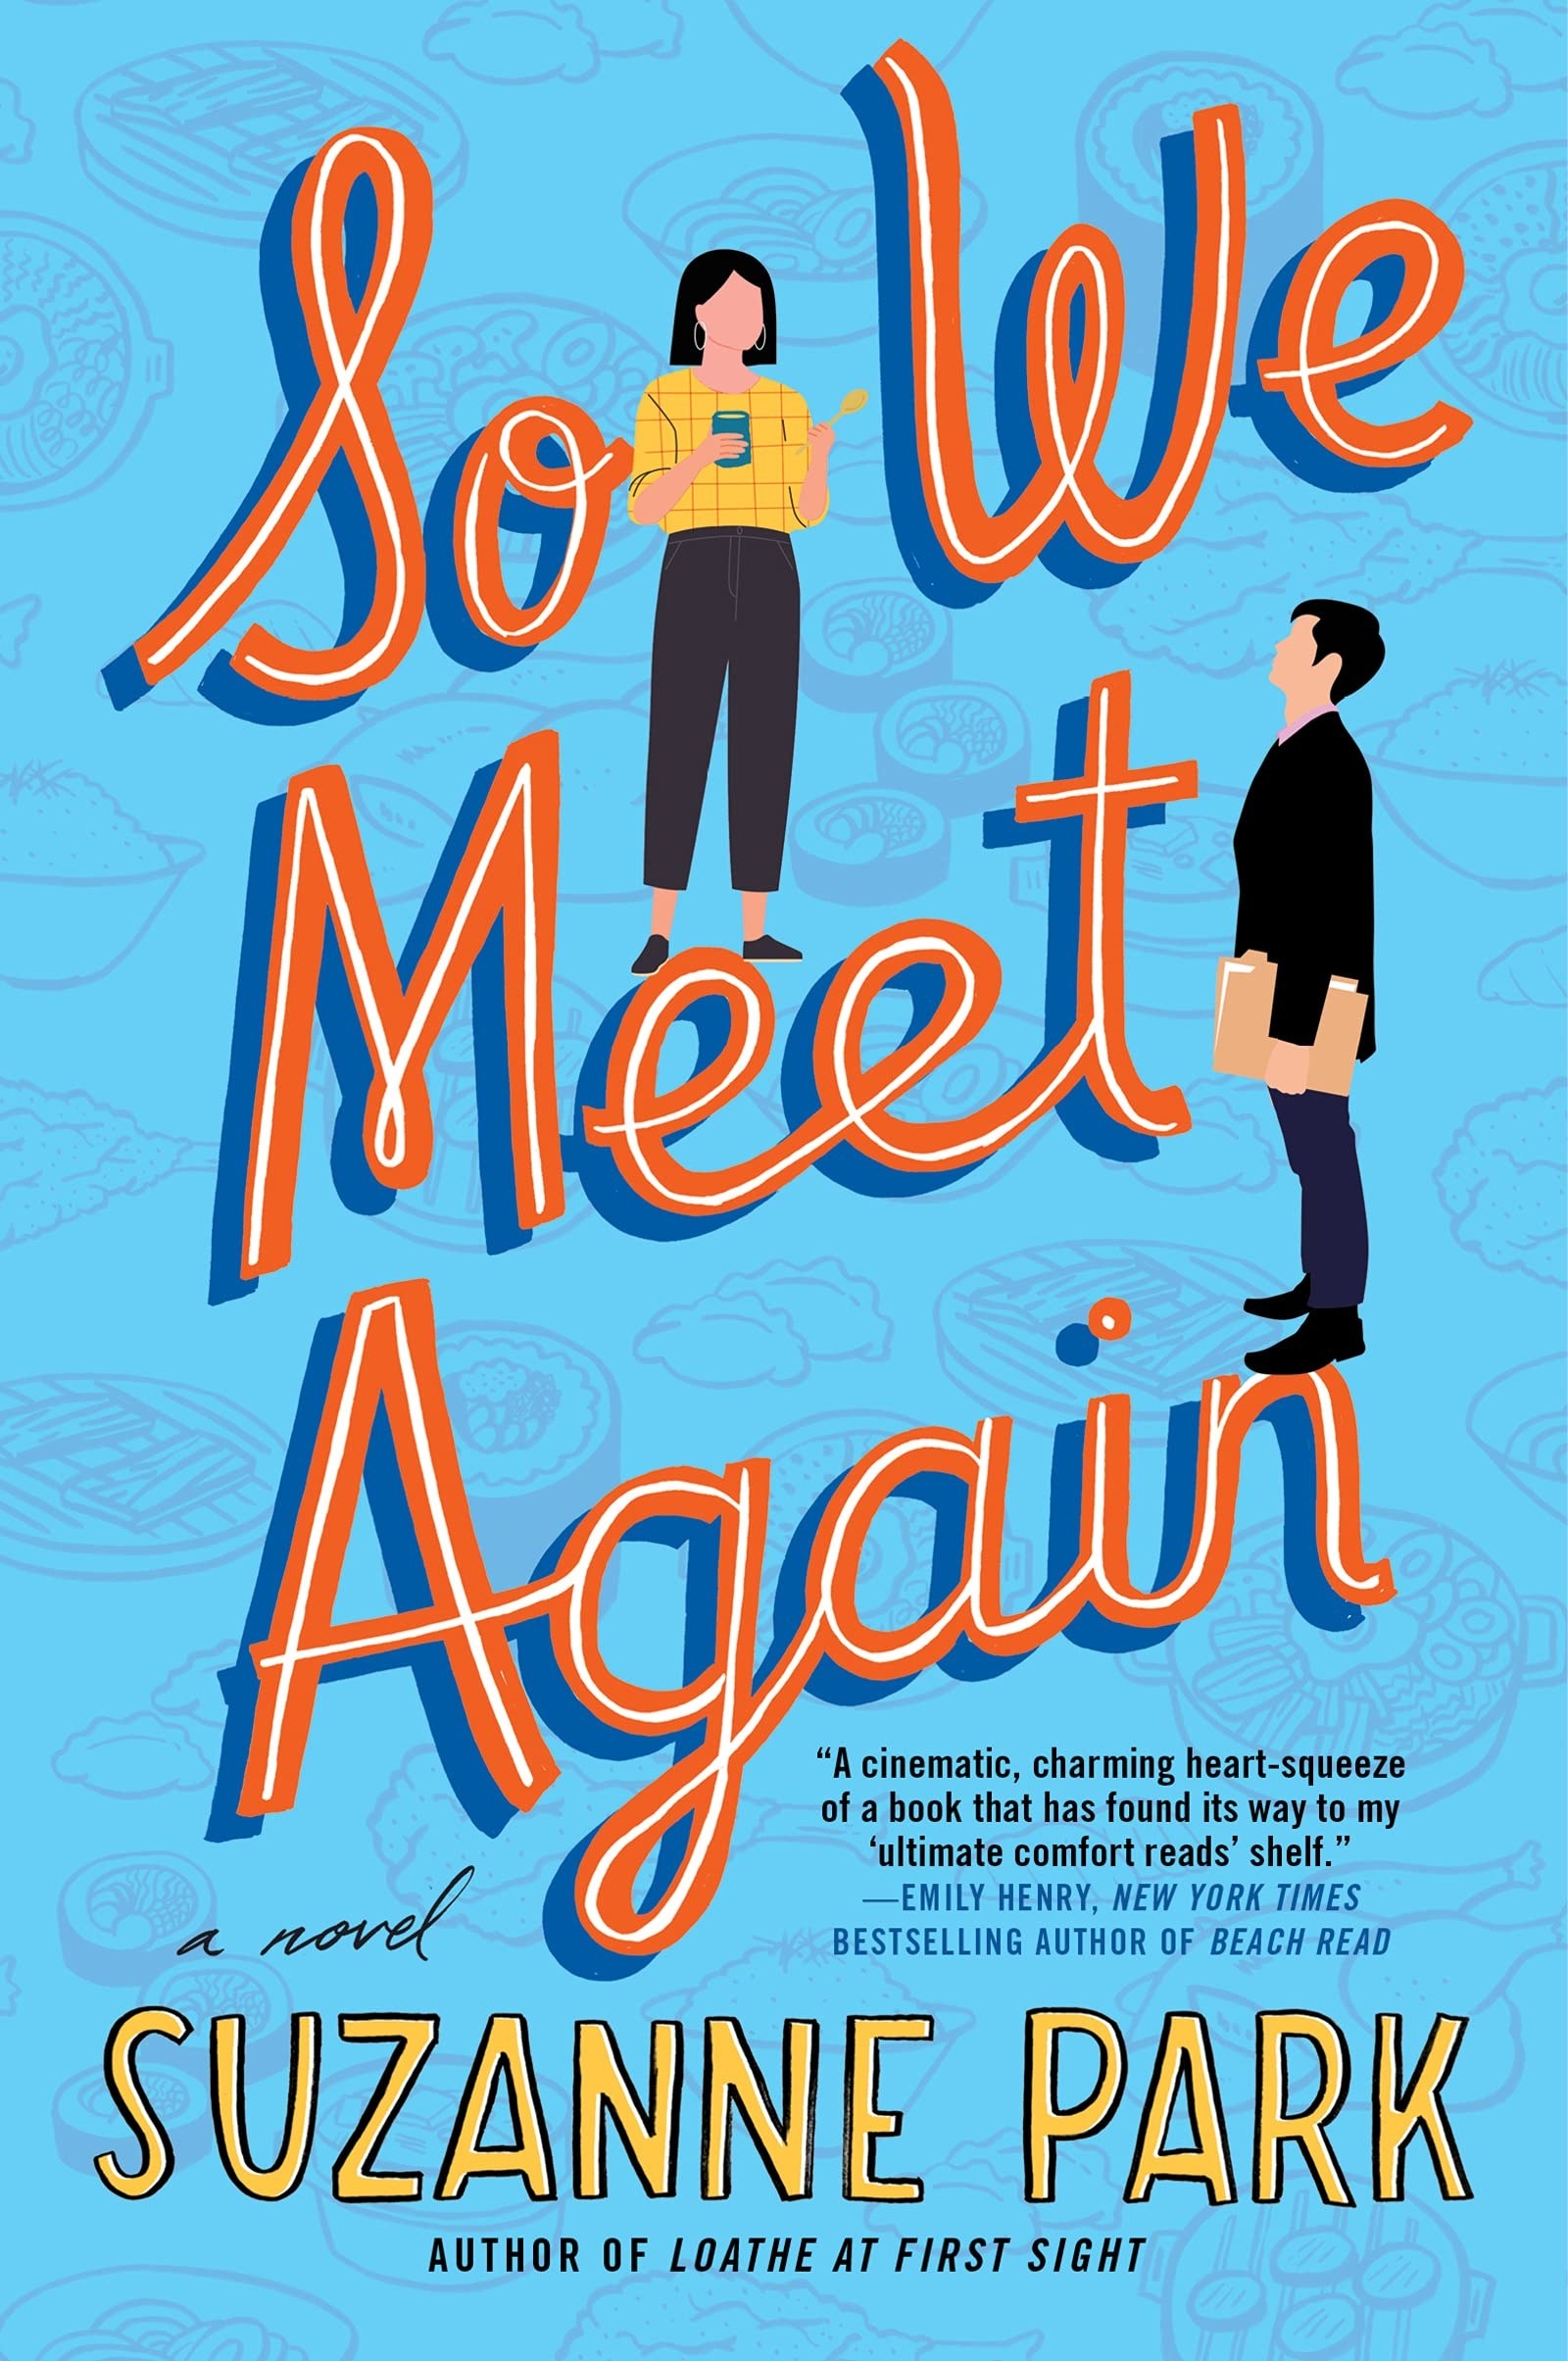 So We Meet Again cover. Book by Suzanne Park